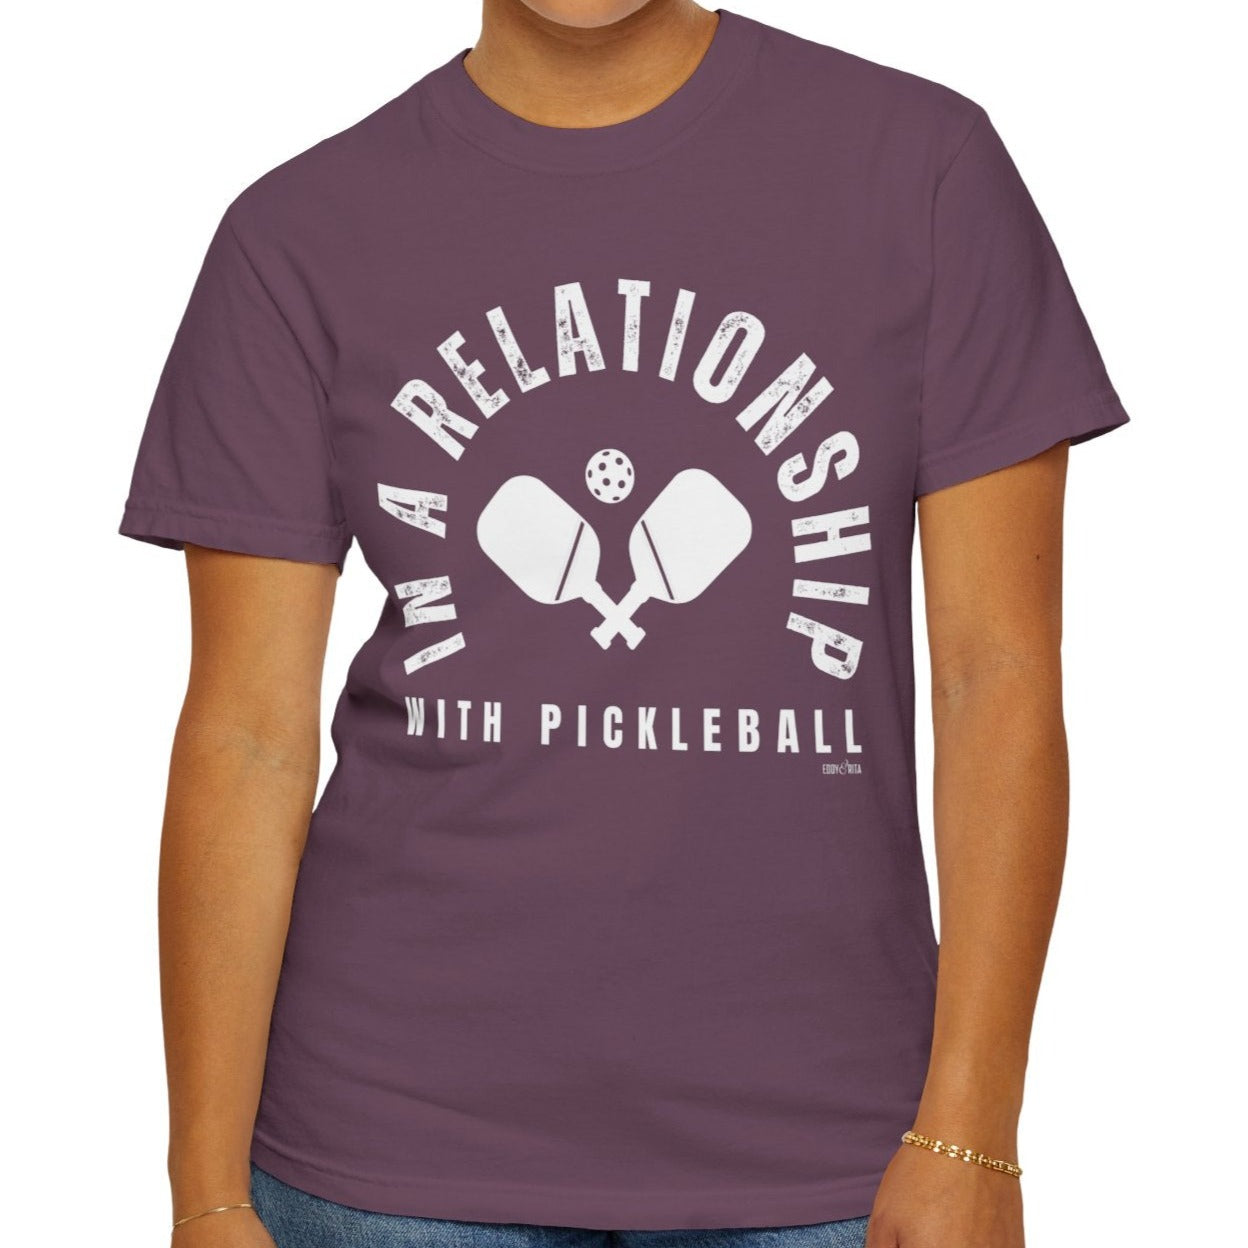 Eddy and Rita Women's Comfort Colors T-Shirt - "In a Relationship with Pickleball" Colorful Graphic Tee for Pickleball Enthusiasts